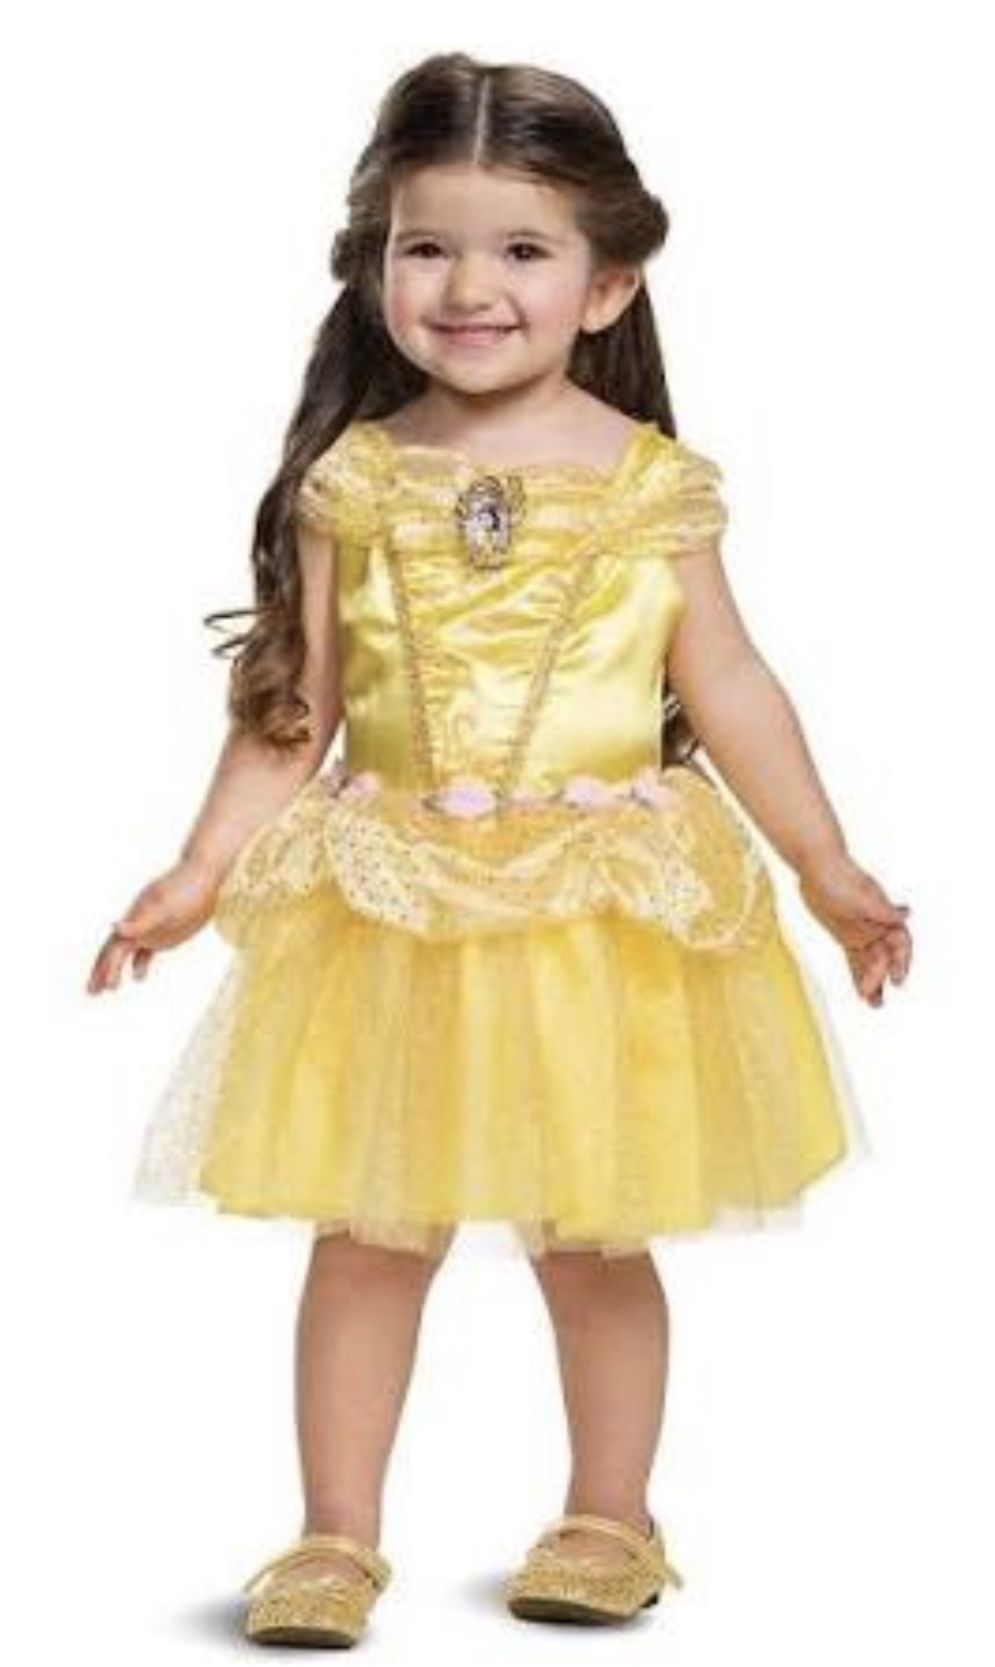 Disney princess dress eith crown  Belle beauty and the beast costume toddler size 3 / 4